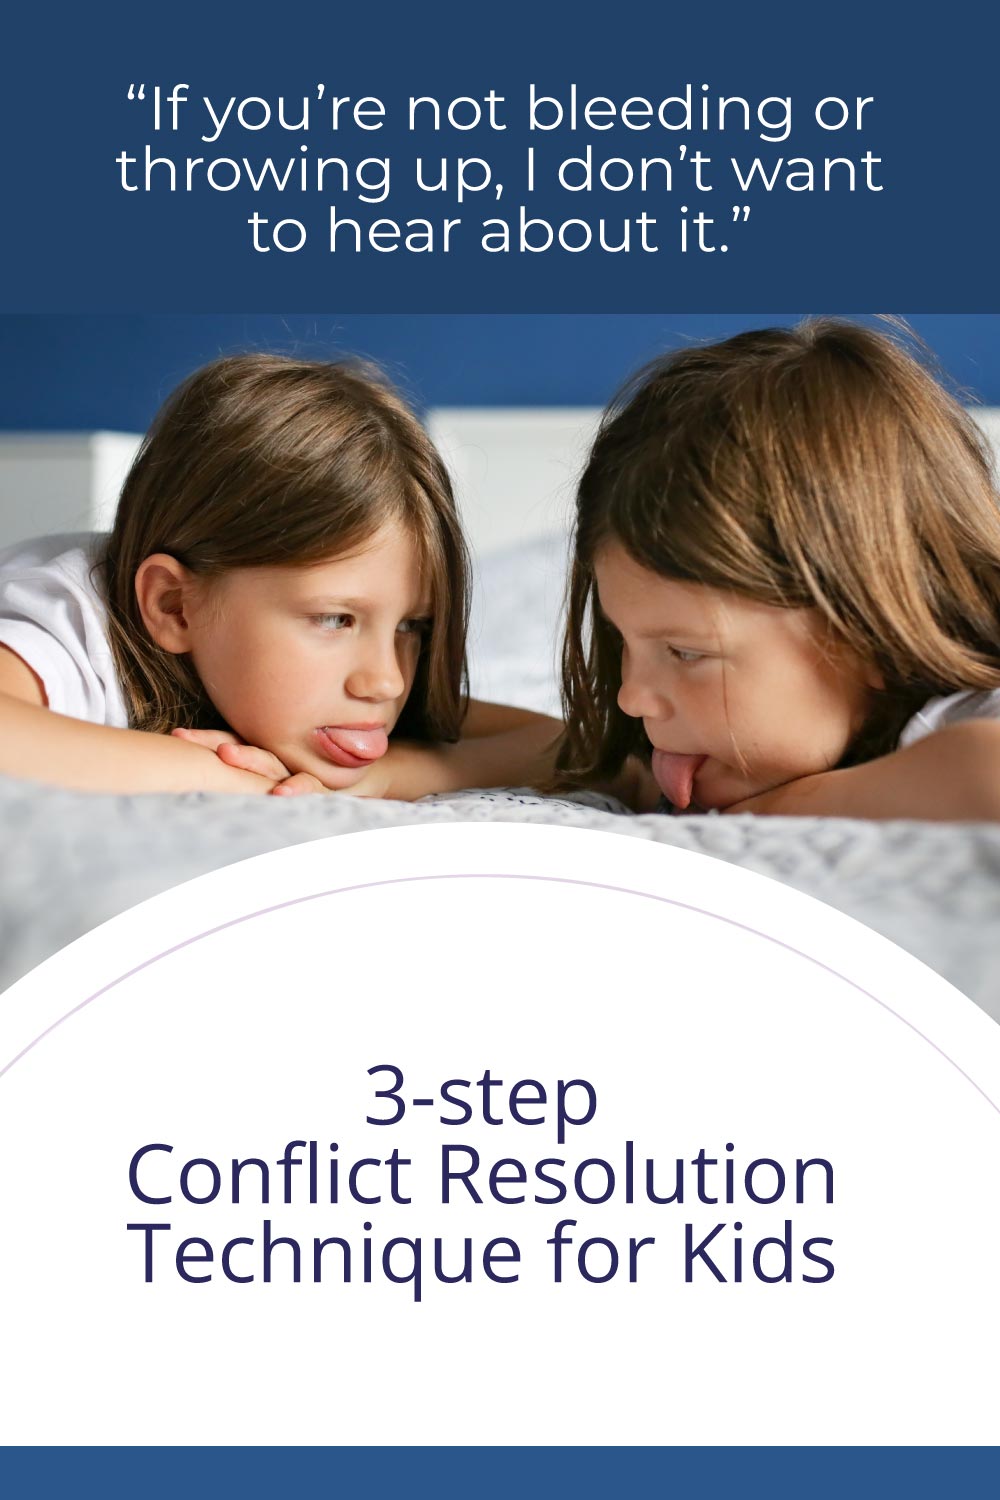 Conflict Resolution Strategy for Kids- 'If you're not bleeding or throwing up I don't want to hear about it'